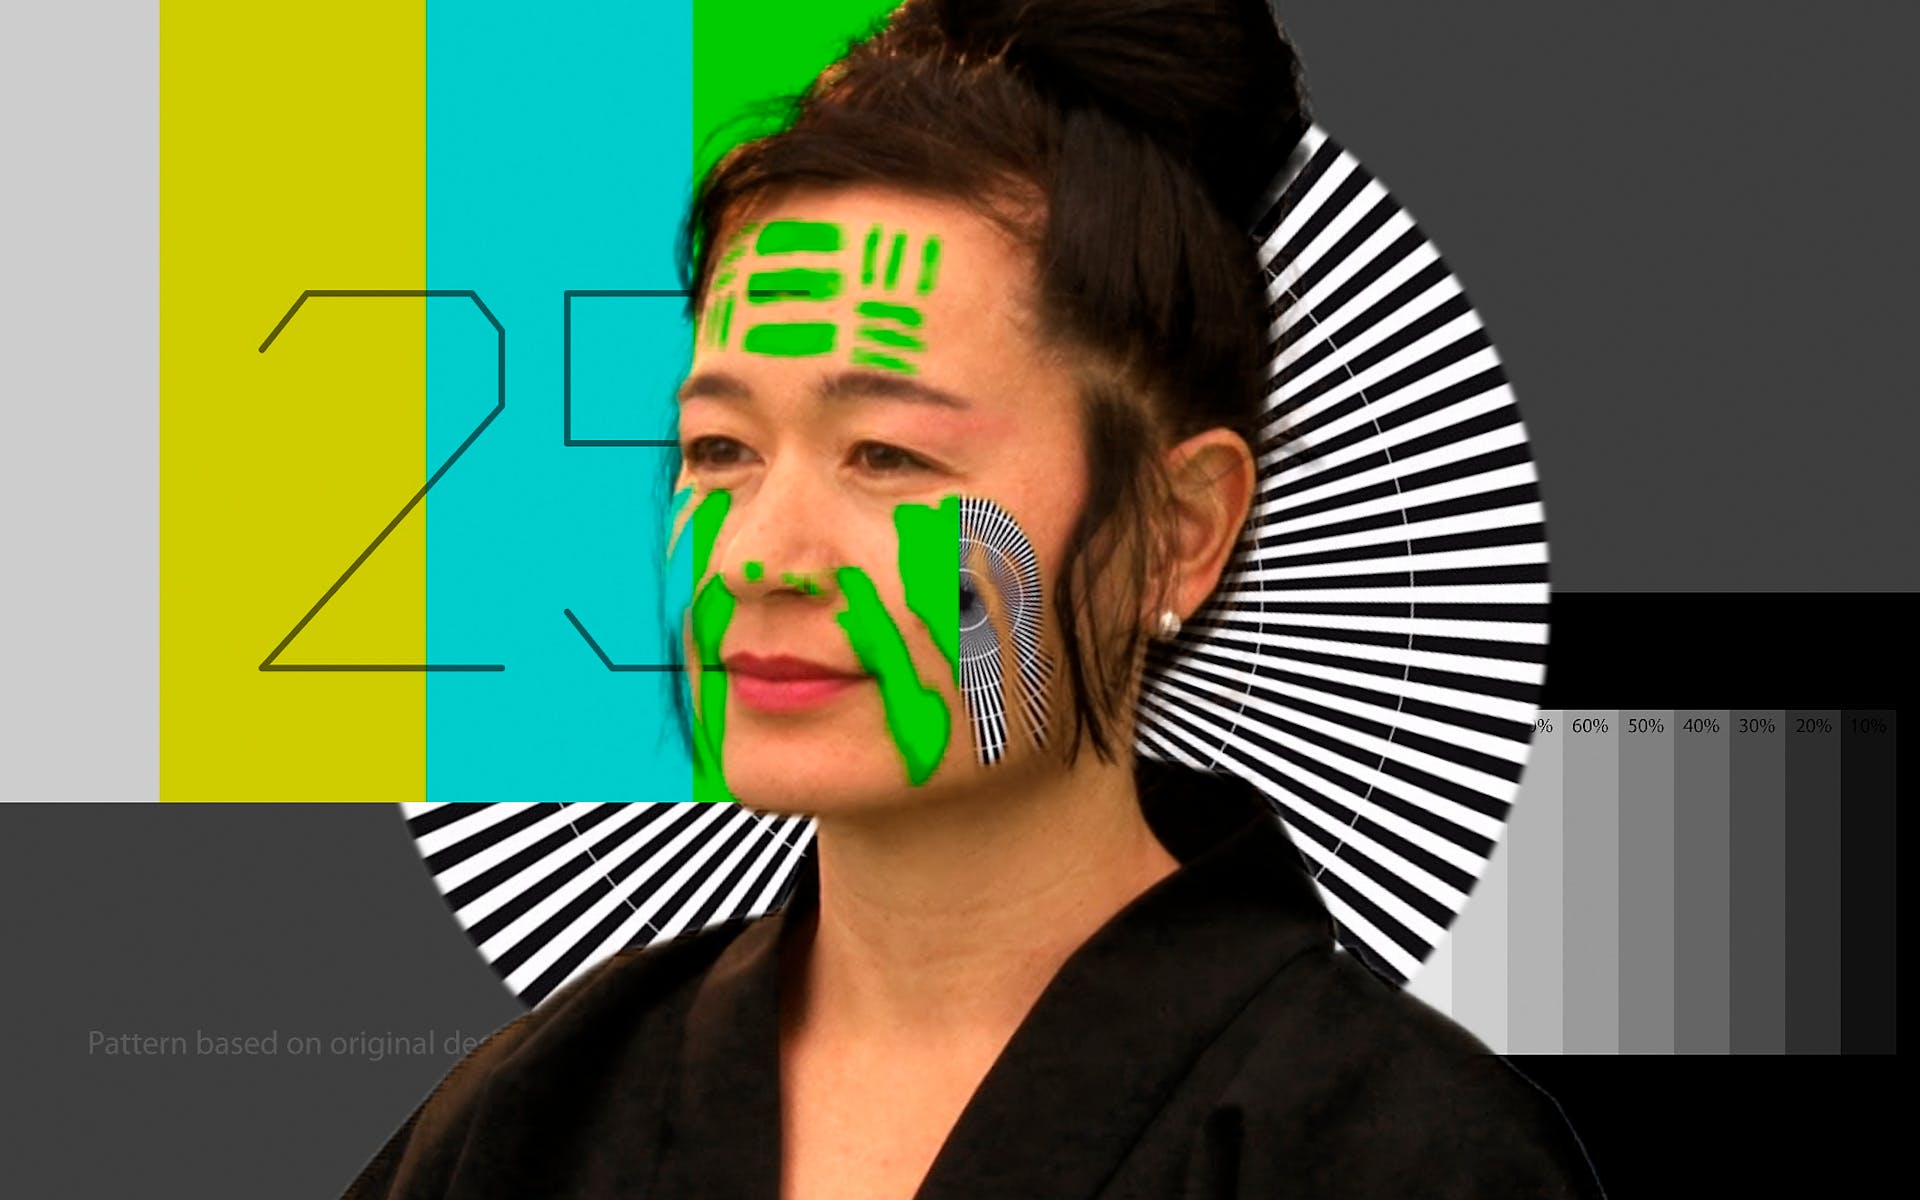 Hito Steyerl, How Not to Be Seen. A Fucking Didactic Educational .Mov File, 2012